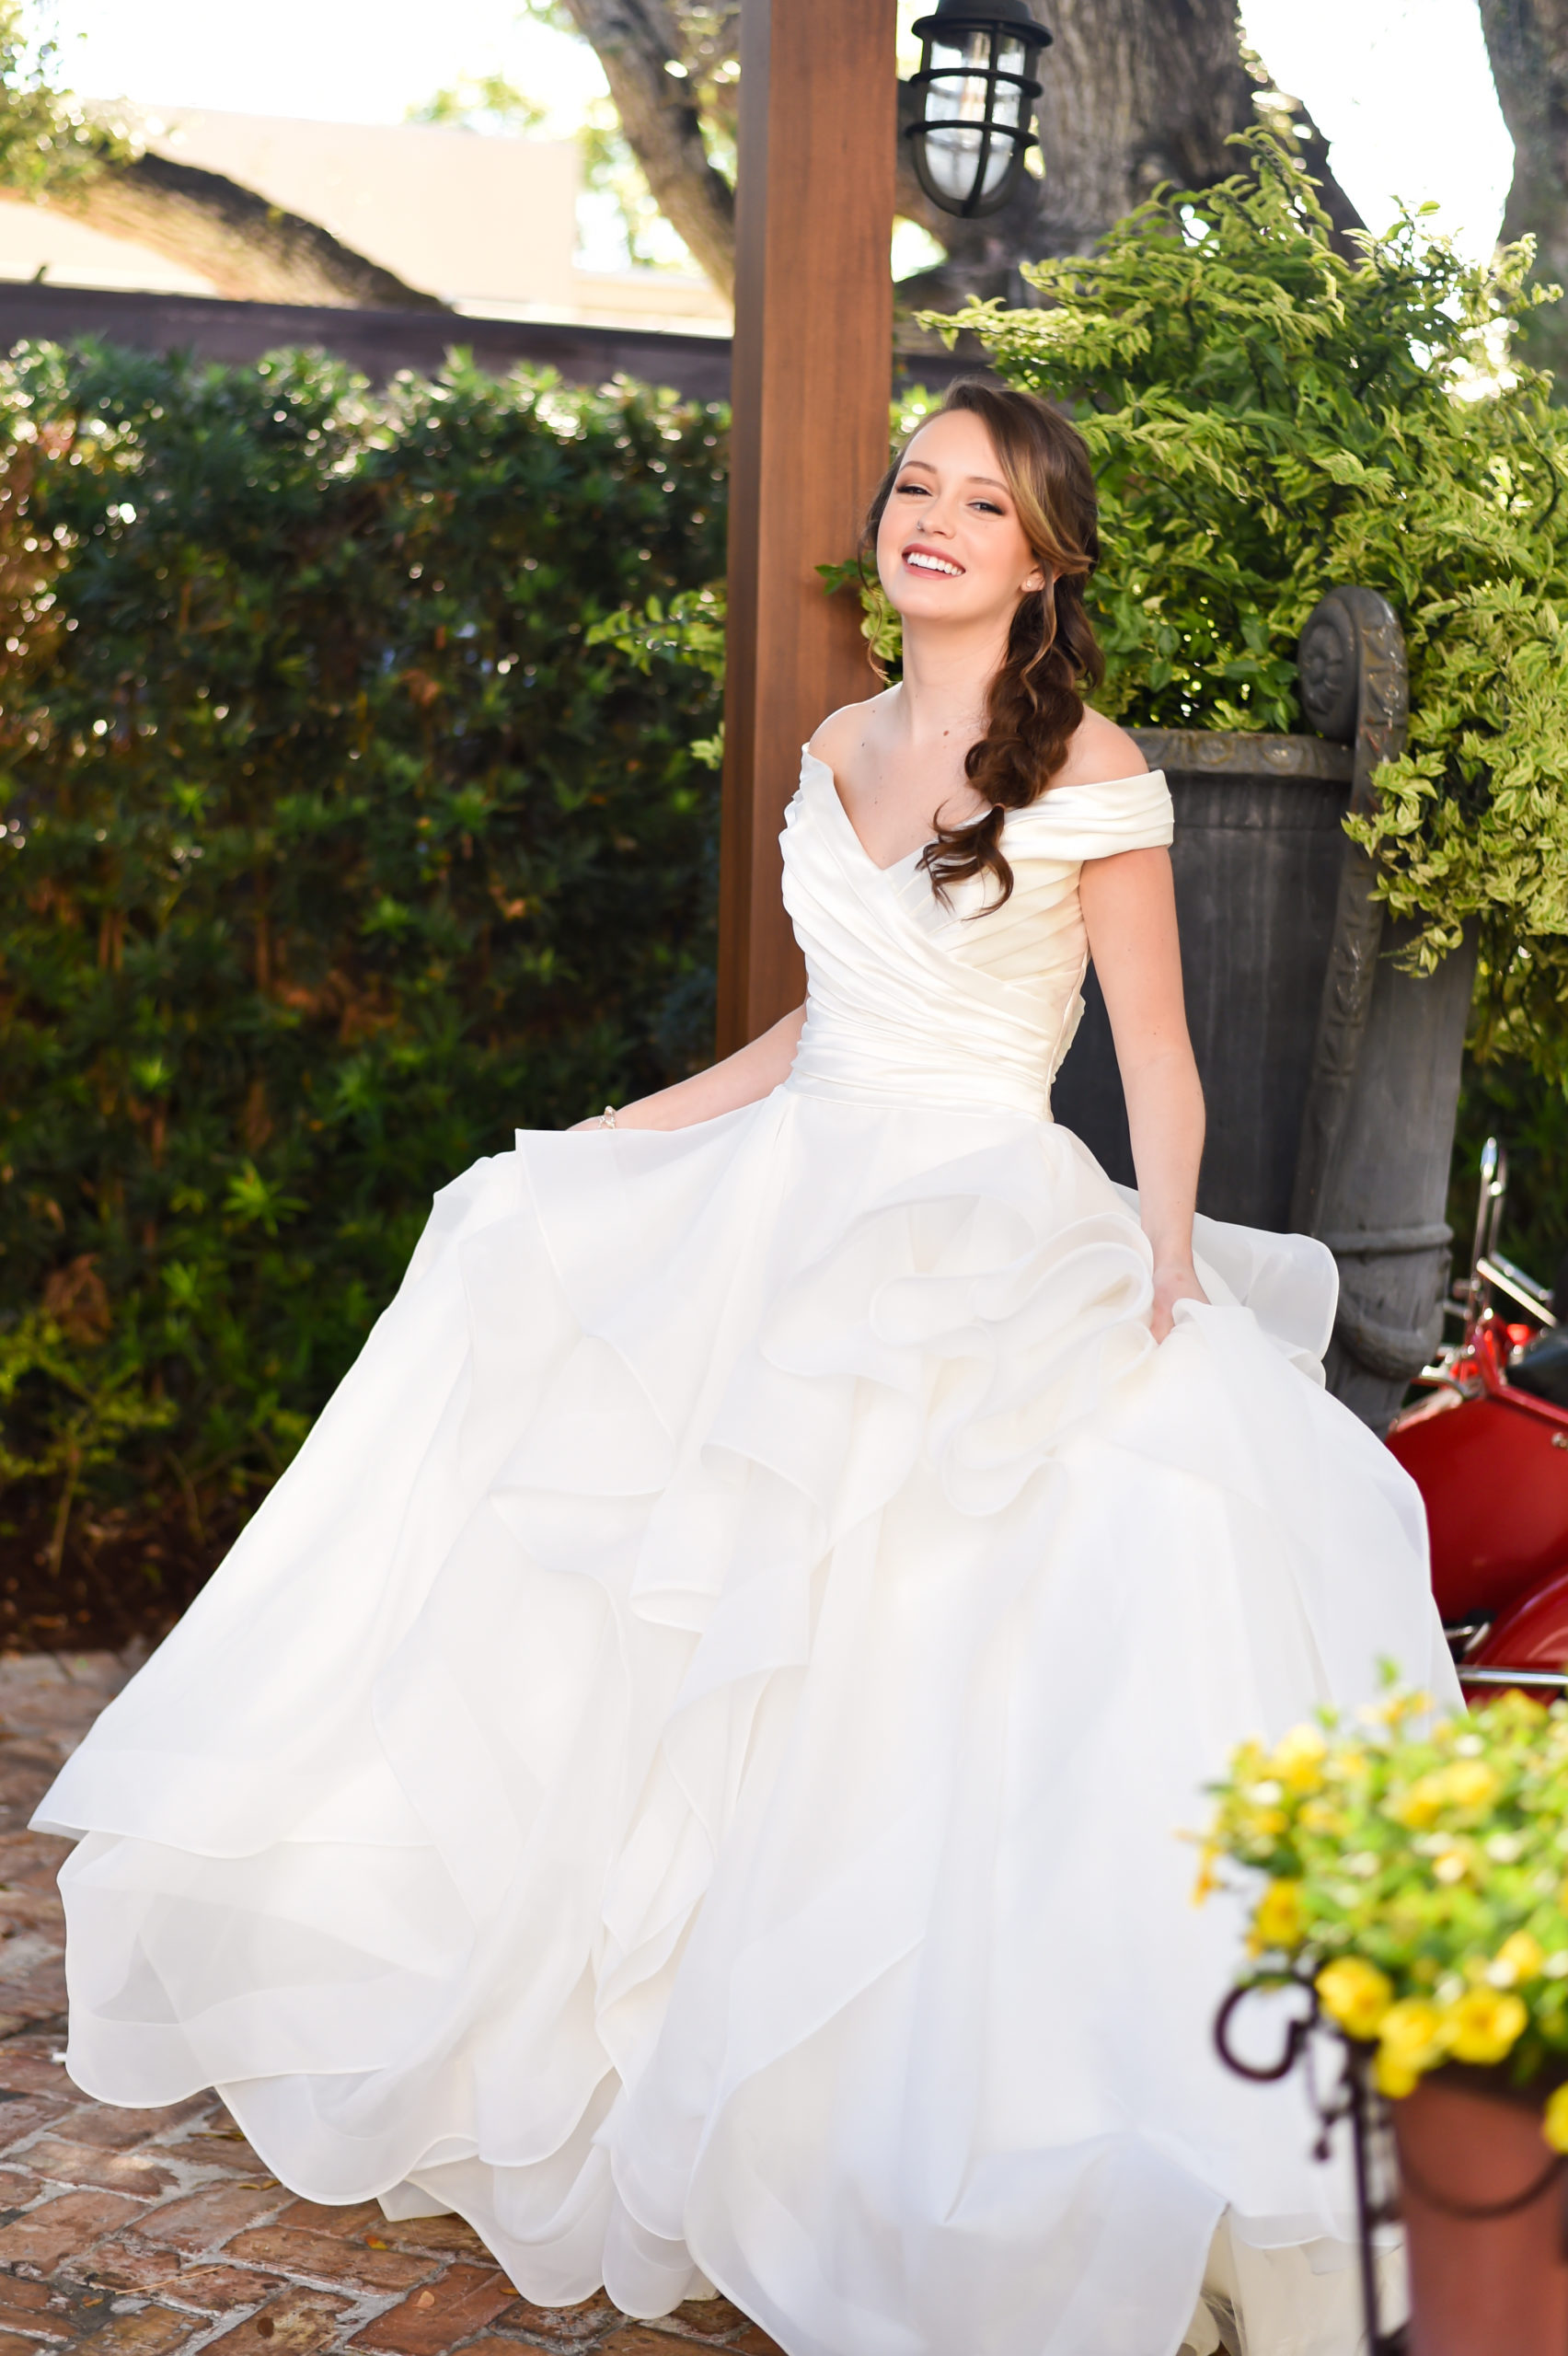 Dinsey wedding ideas and Beauty and the Beast wedding photos! Belle wear a beautiful Maggie Sottero off the shoulder wedding gown